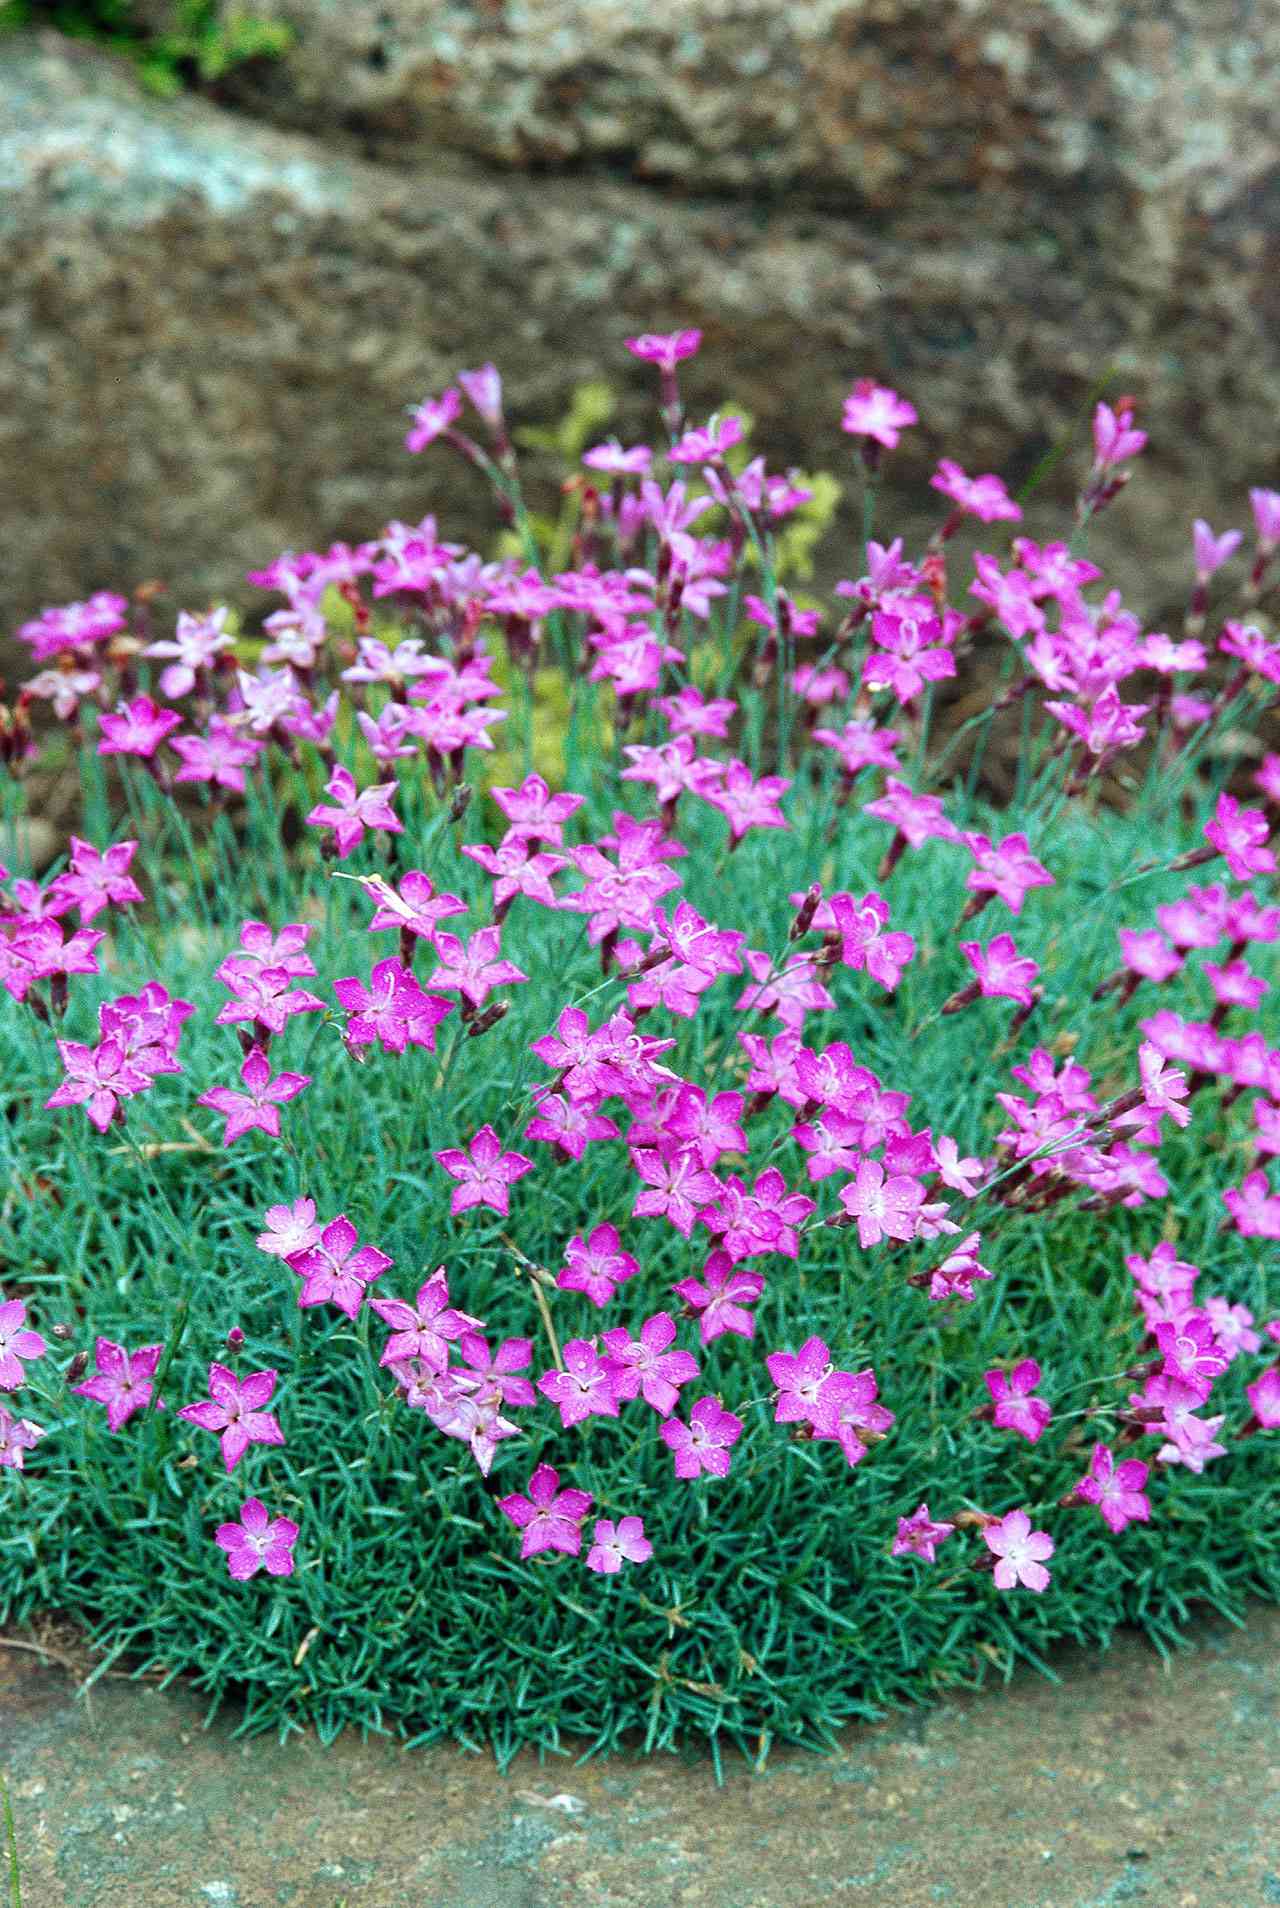 Drought Tolerant Groundcovers Better, Small Pink Ground Cover Plants Full Sun Low Maintenance Perennials